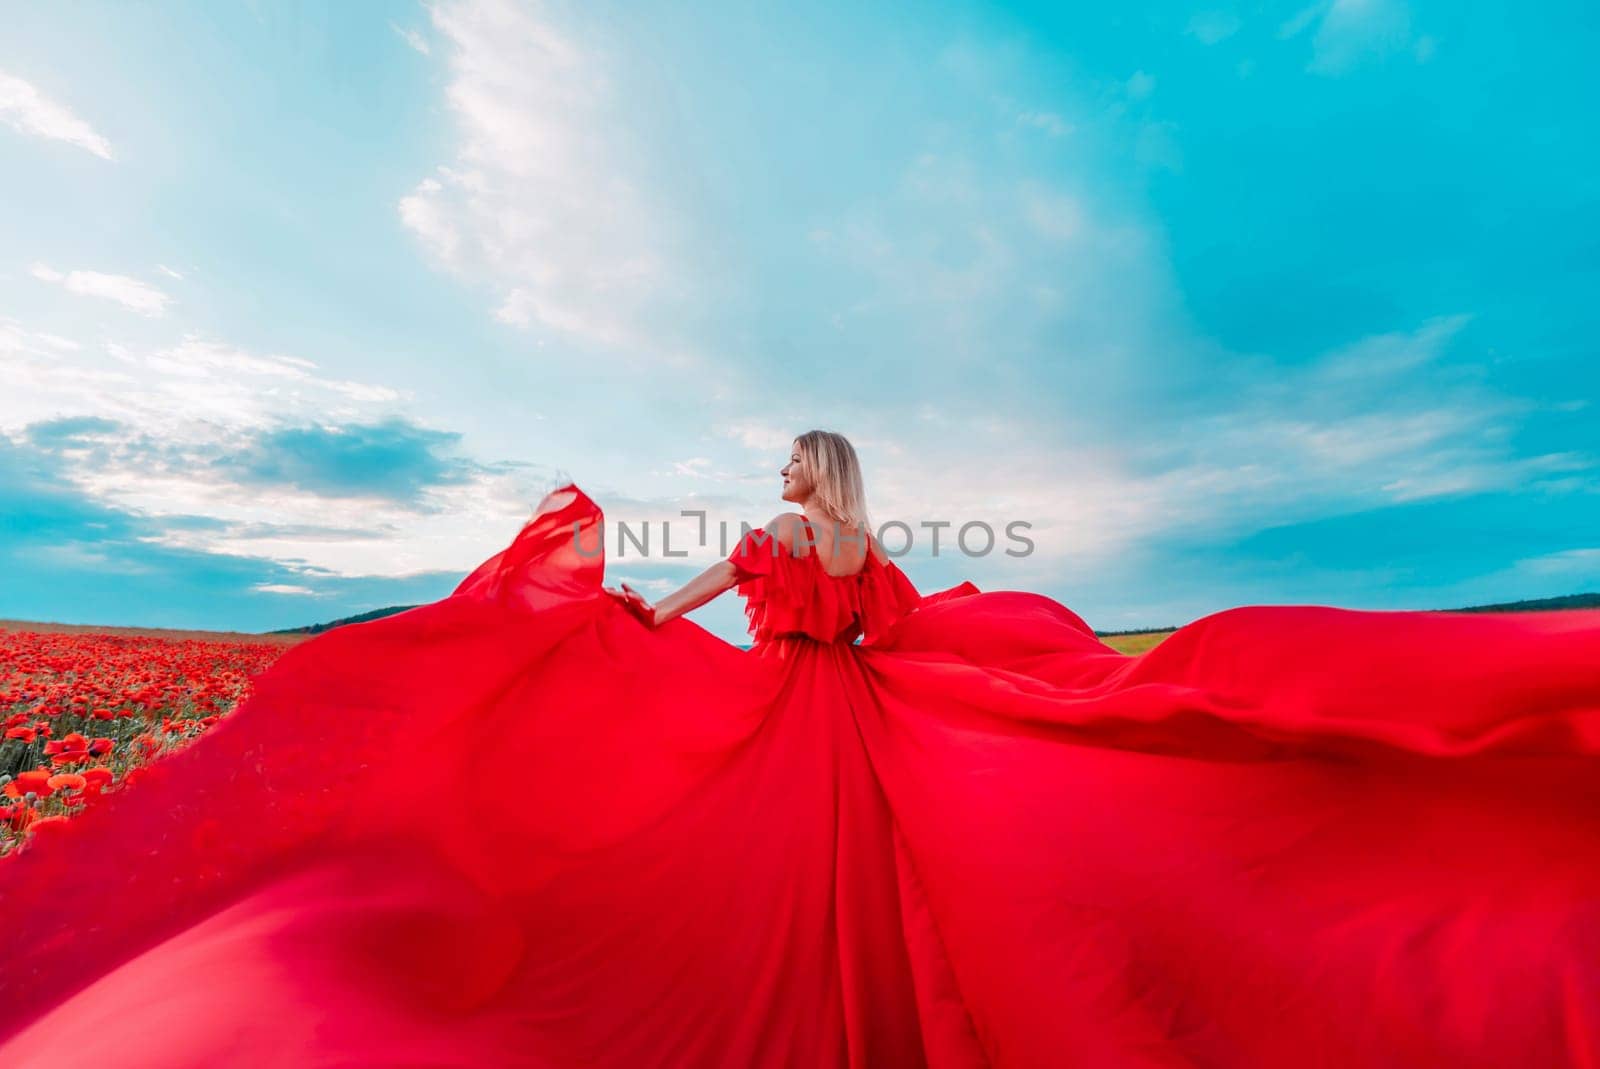 Woman poppy field red dress. Happy woman in a long red dress in a beautiful large poppy field. Blond stands with her back posing on a large field of red poppie